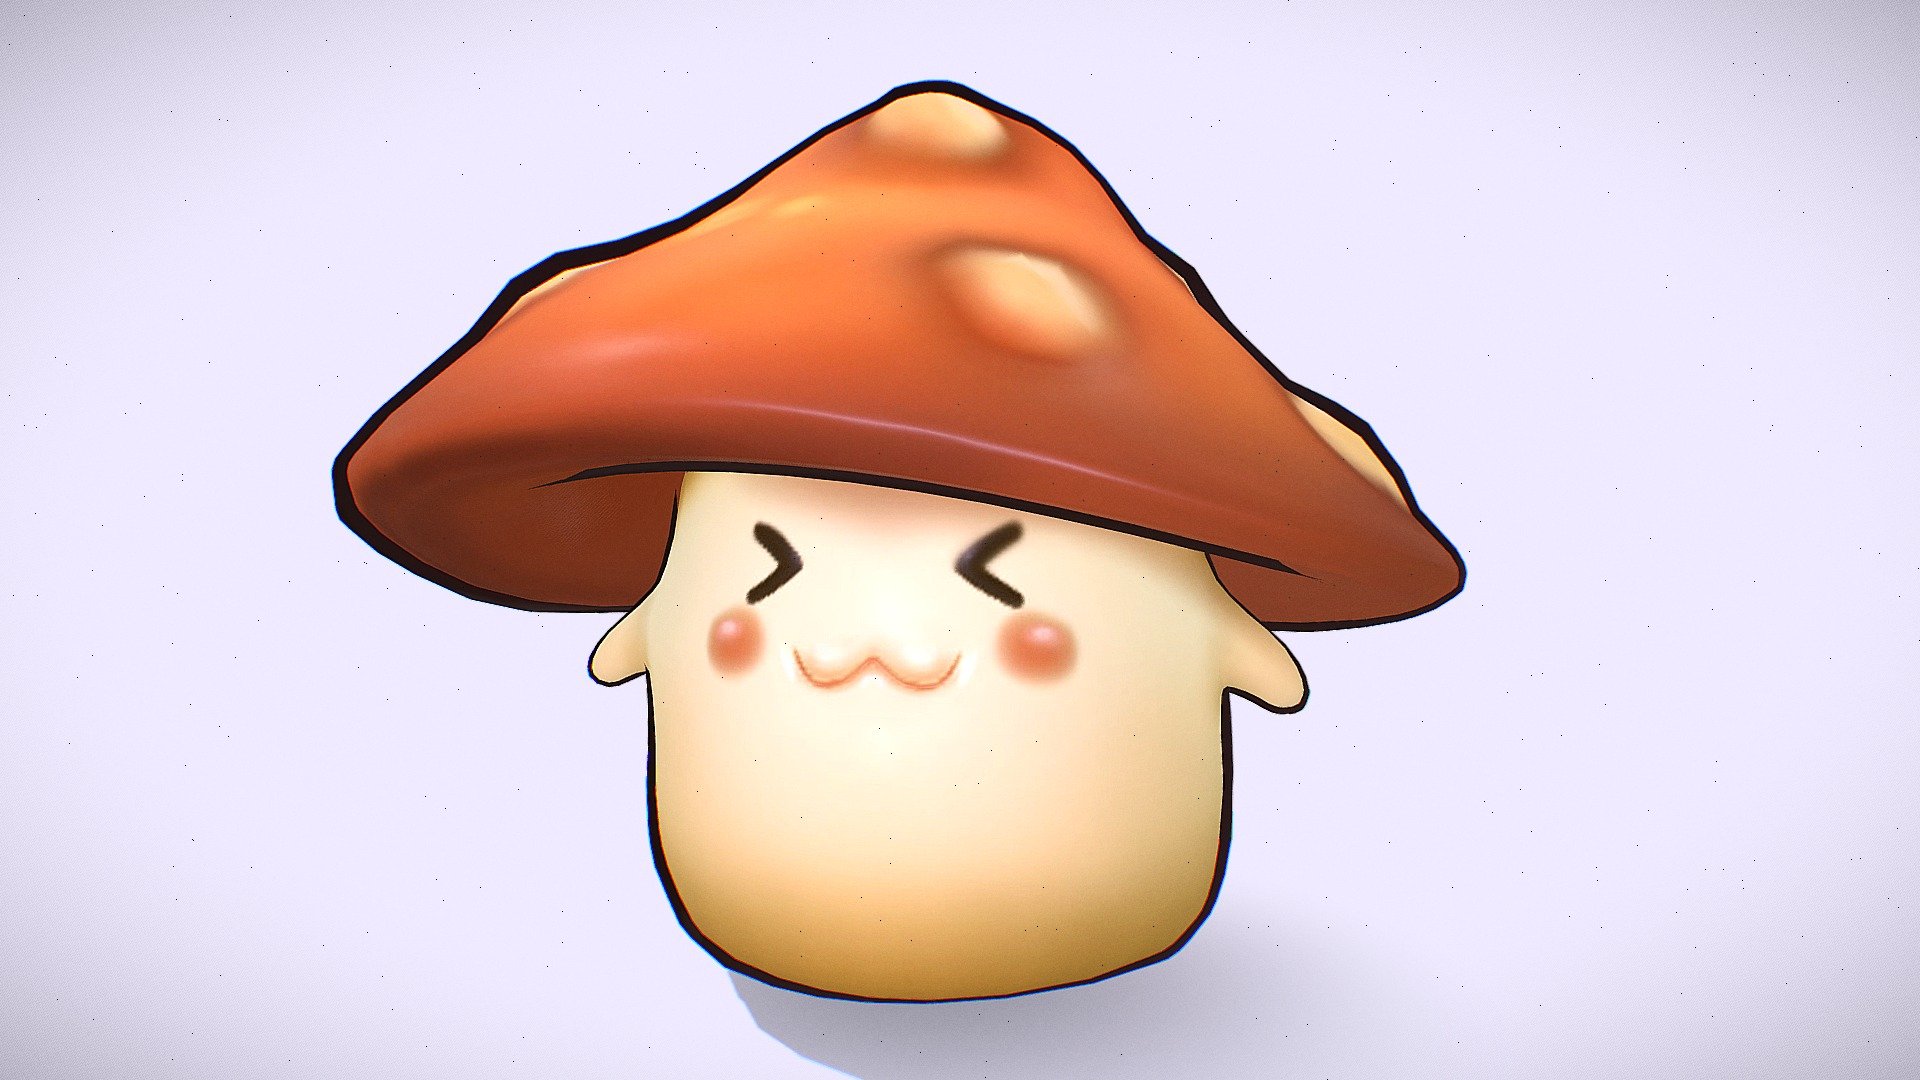 a quick model just for fun - Cute Mushroom - 3D model by saraelshenawy 3d model